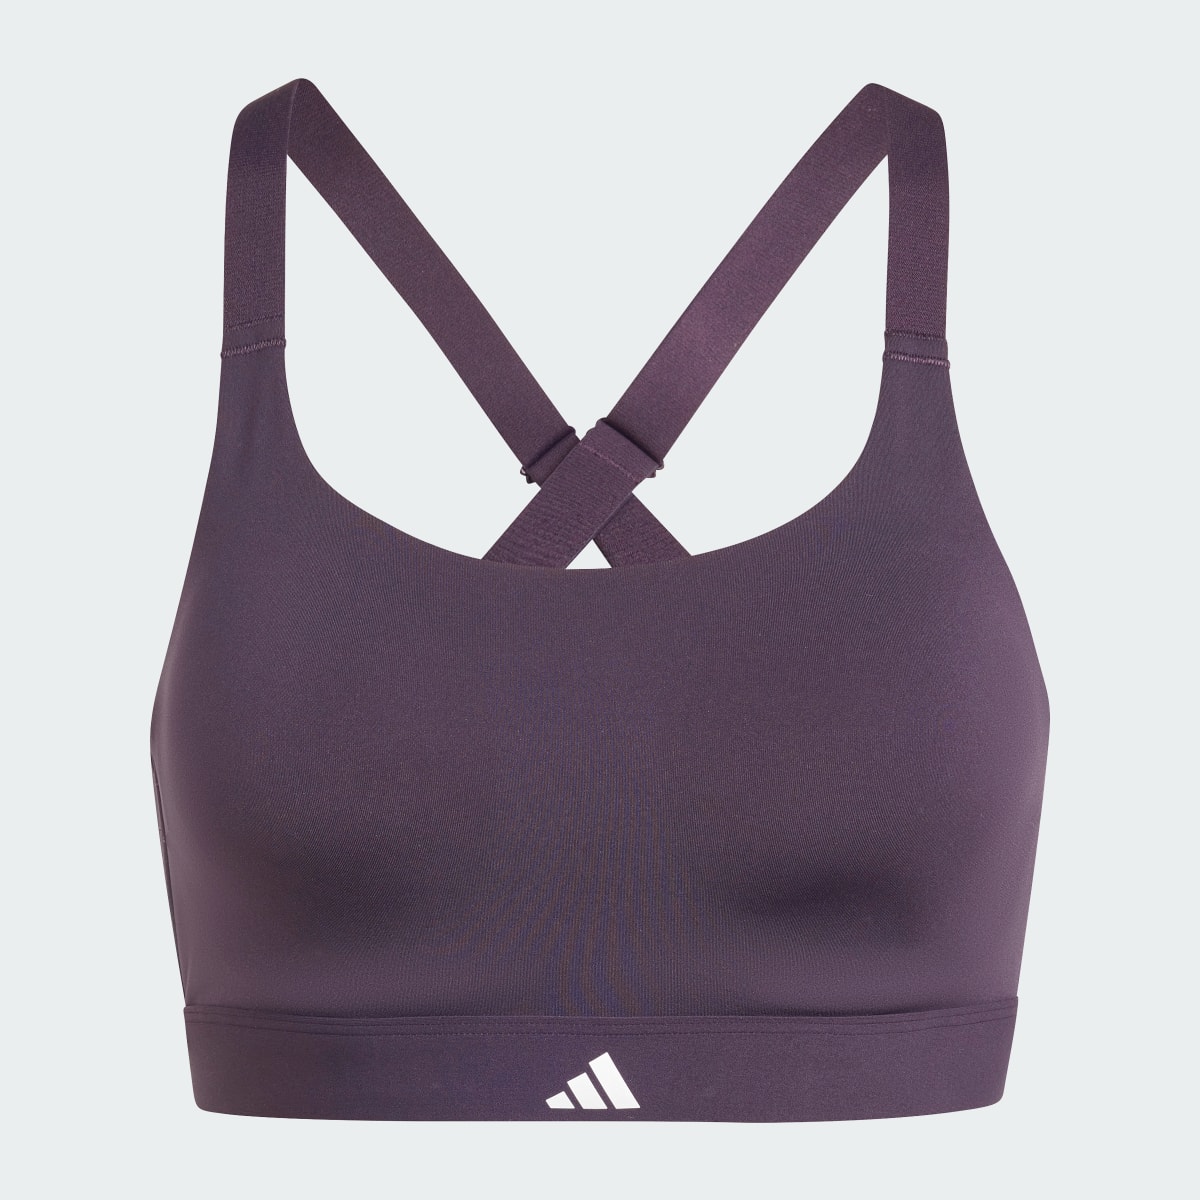 Adidas Brassière de training TLRD Impact Luxe Maintien fort. 4